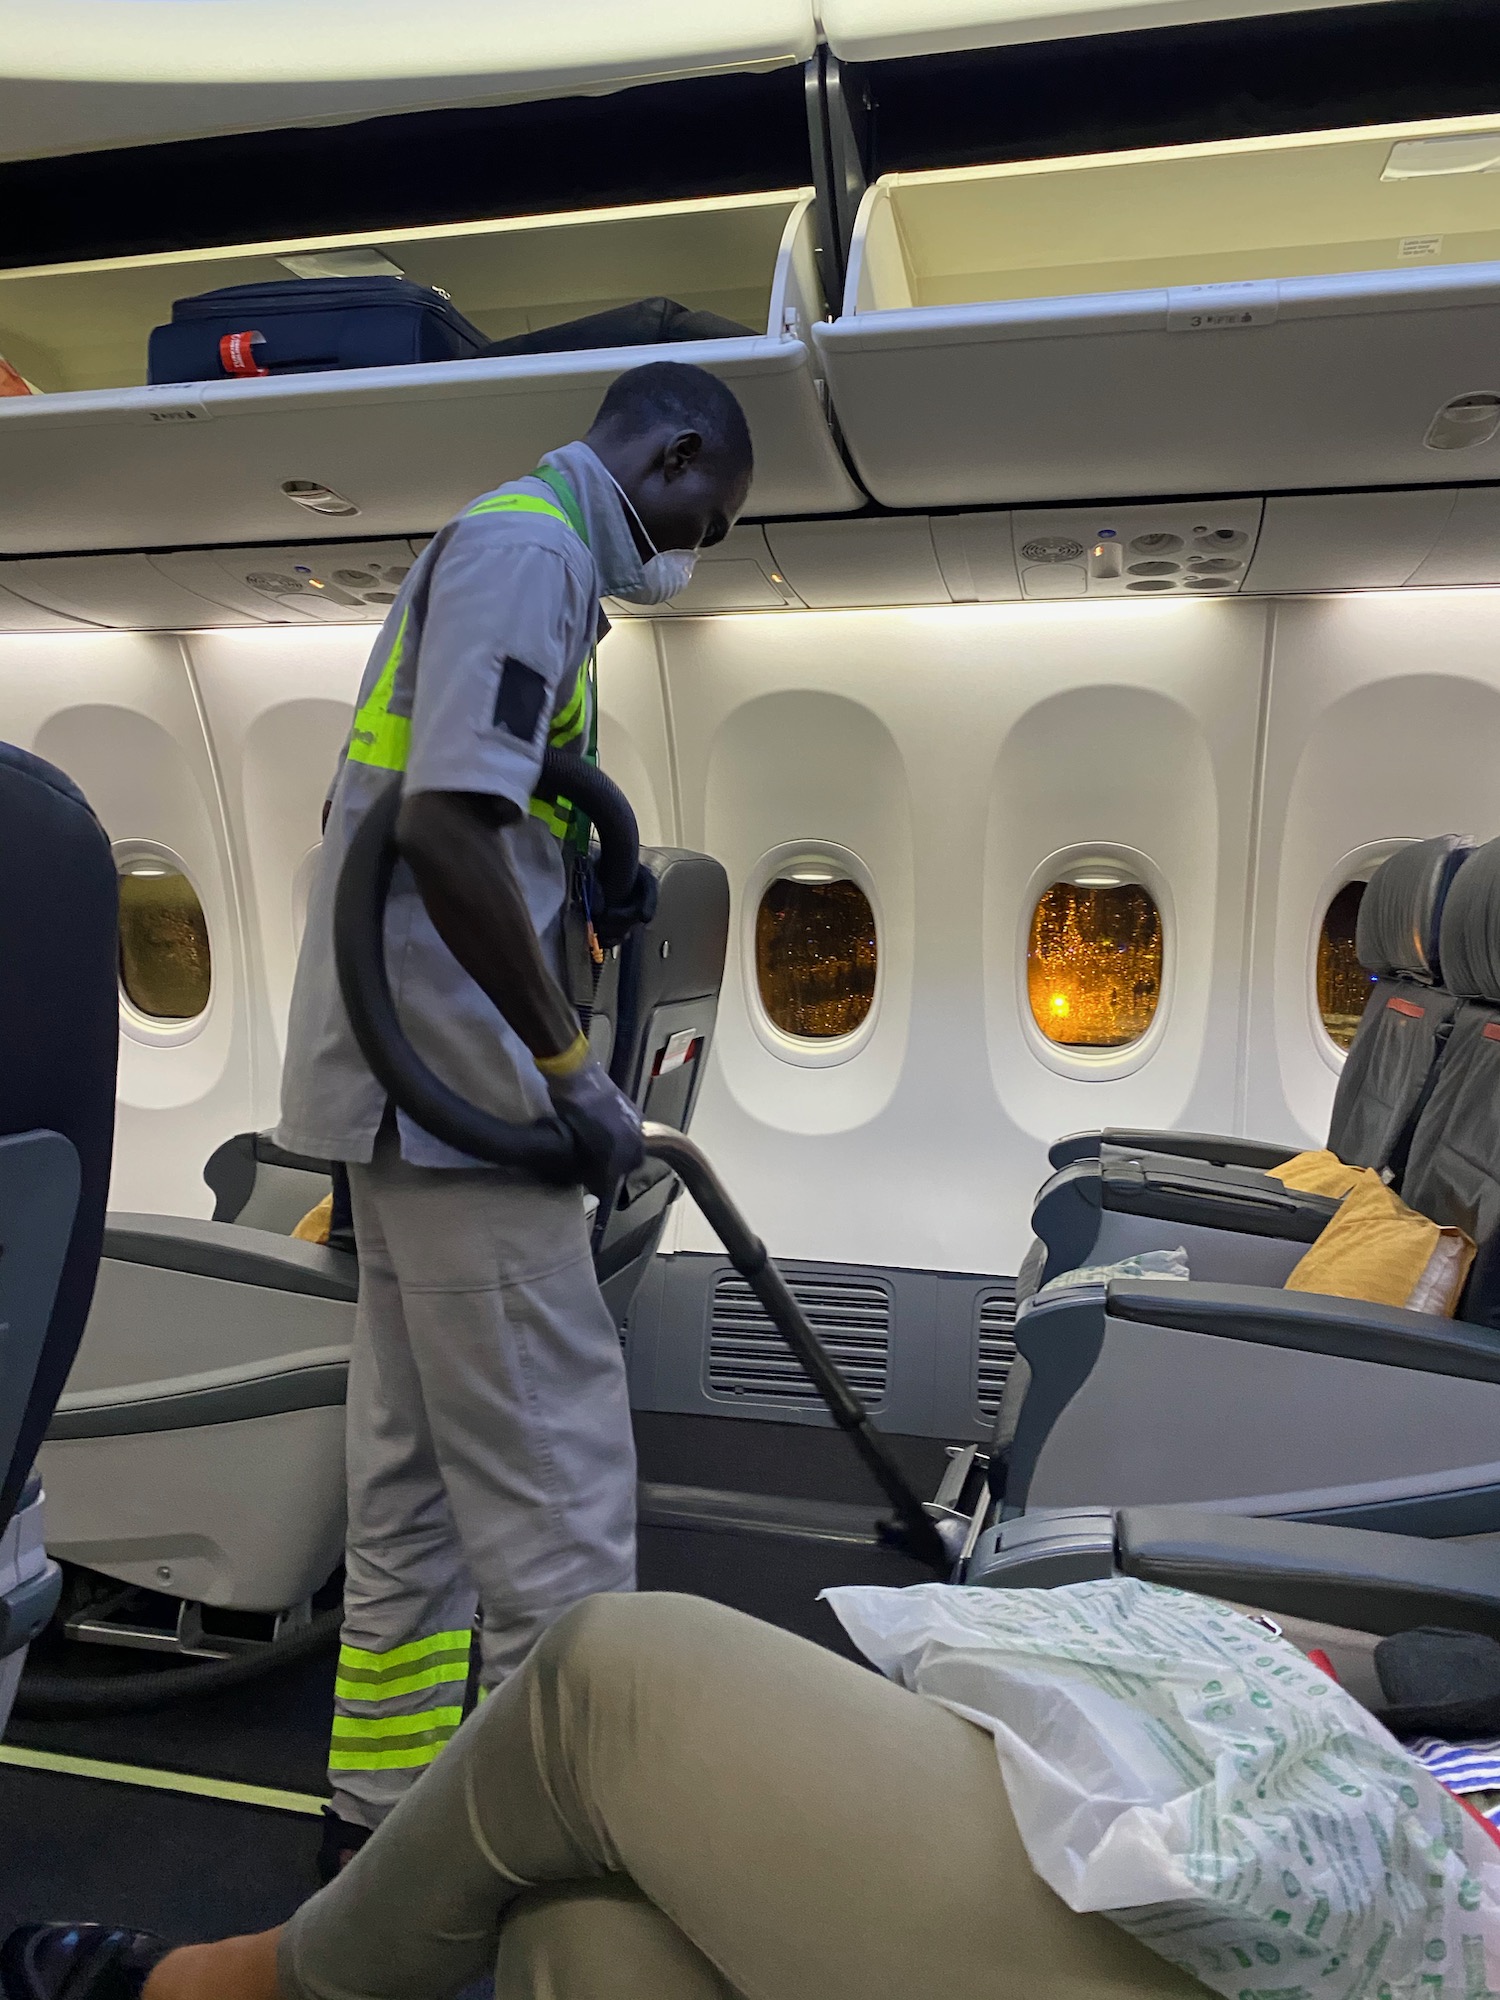 a man vacuuming the seats of an airplane